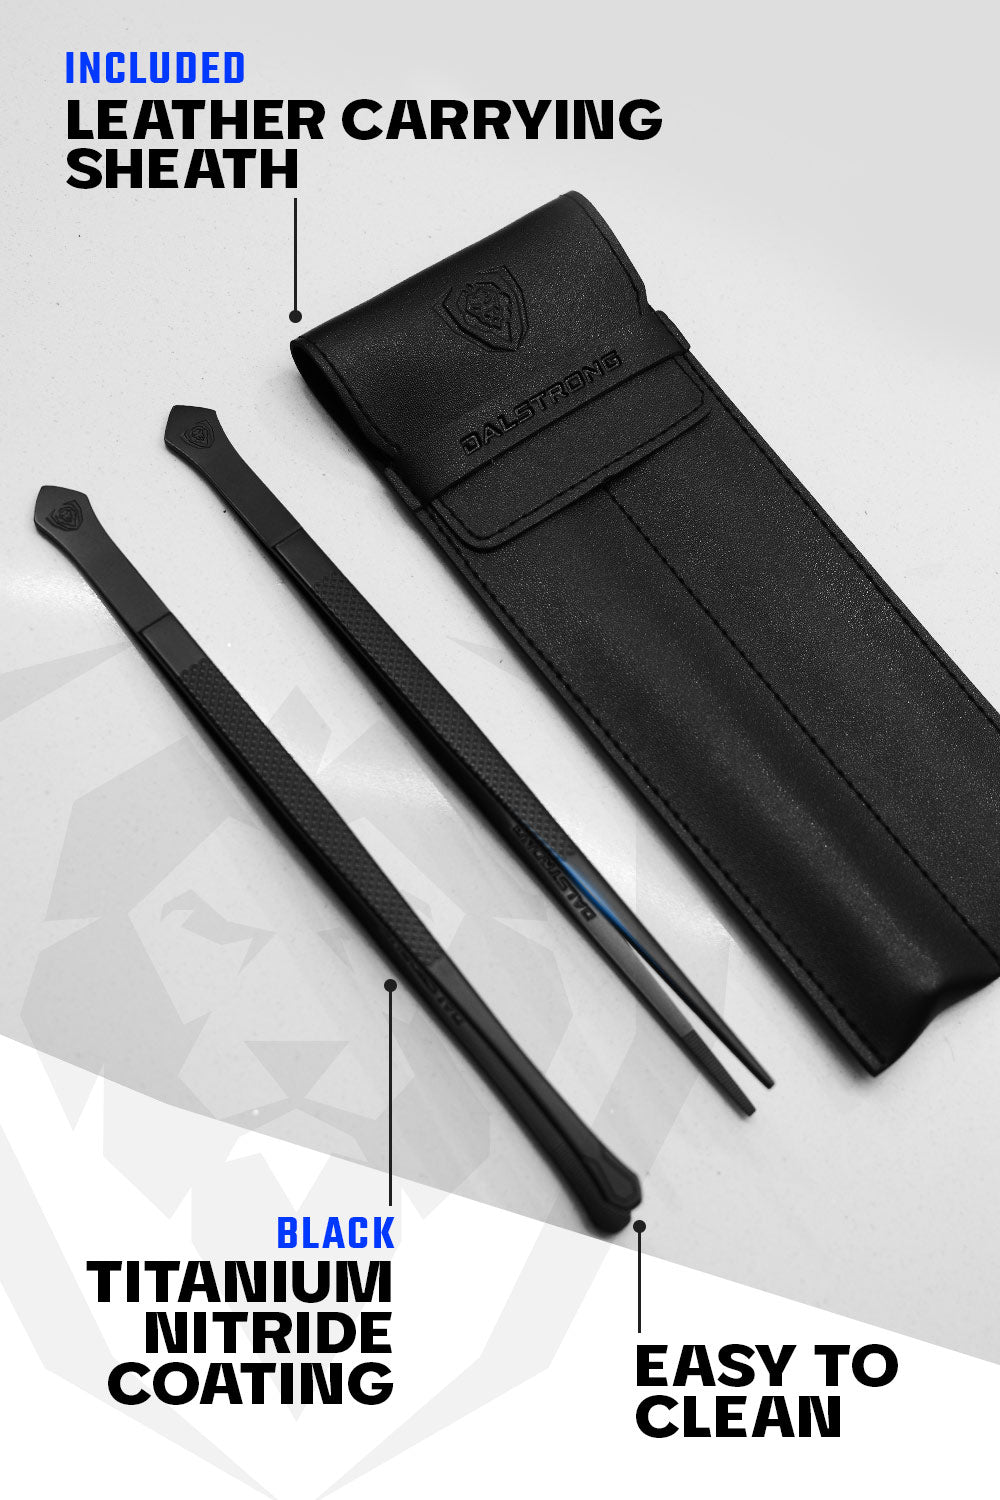 Dalstrong 10.5 inch straight wide tip 2 piece plating tweezers set showcasing it's leather carrying sheath.